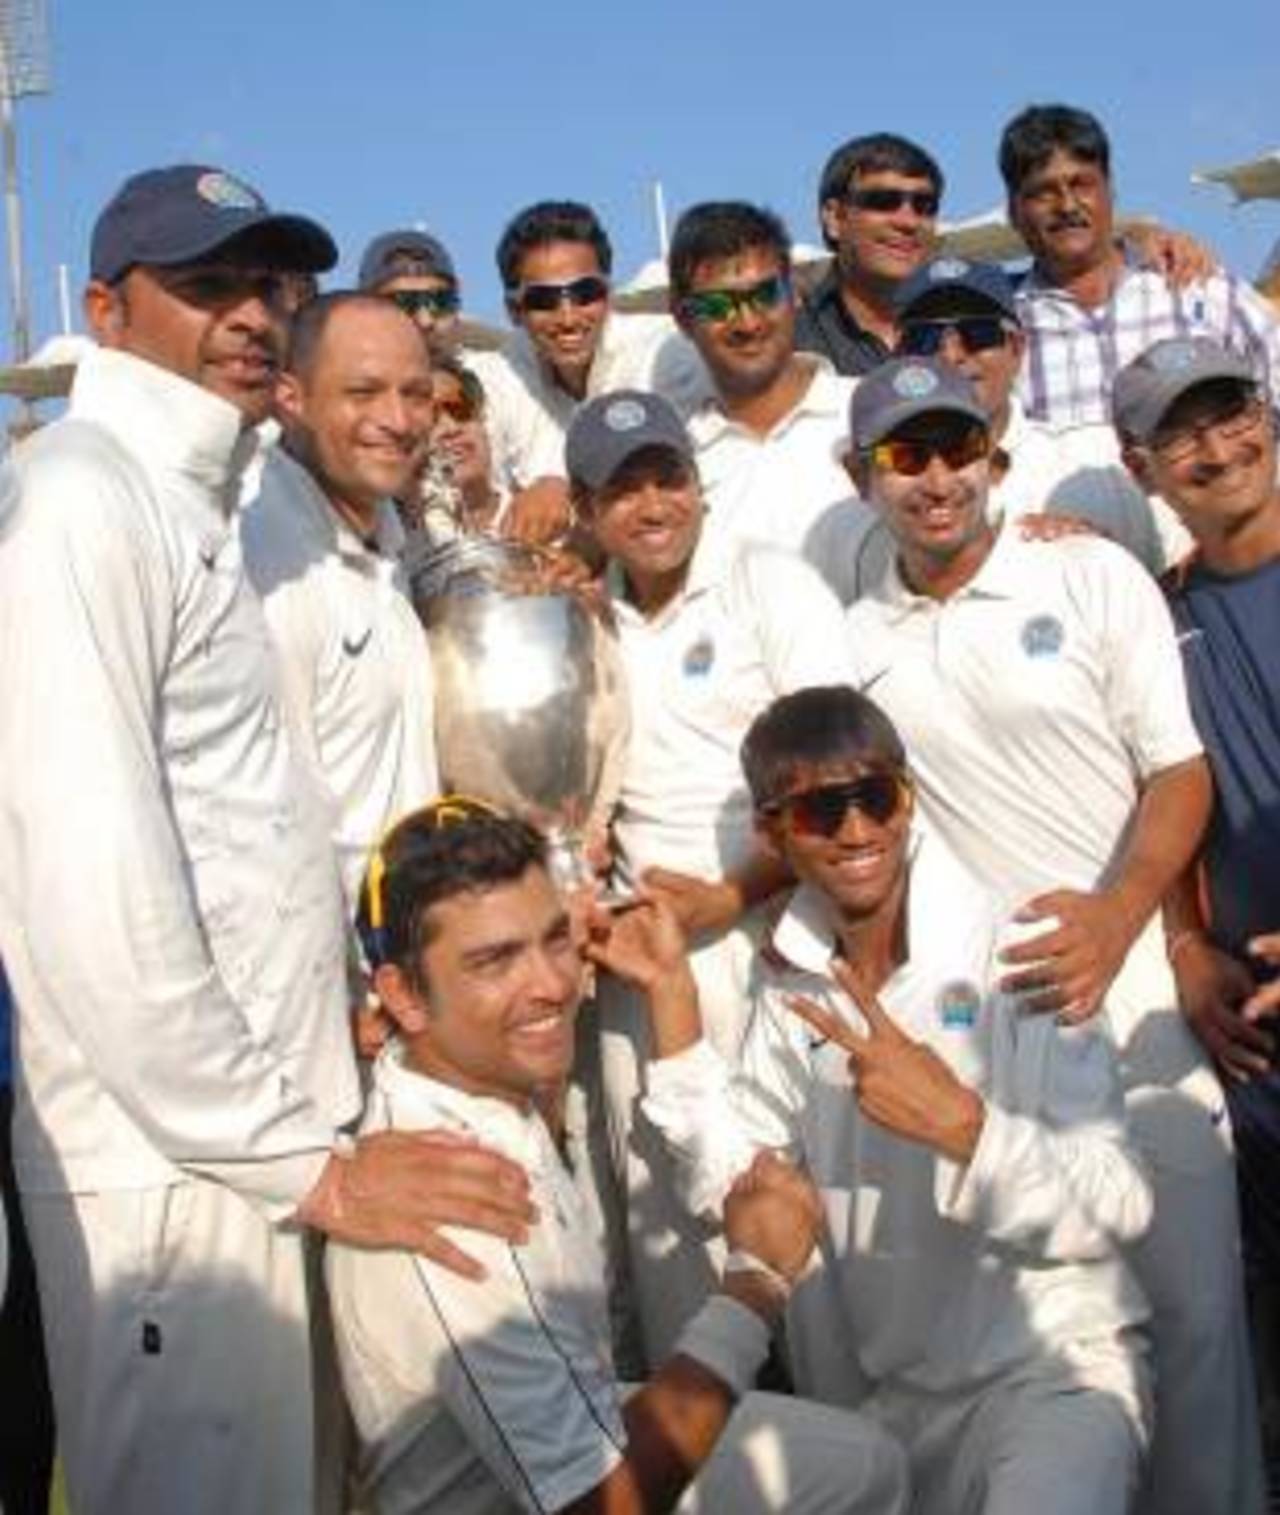 The Rajasthan players are all smiles, Tamil Nadu v Rajasthan, Ranji Trophy final, Chennai, 5th day, January 23, 2012